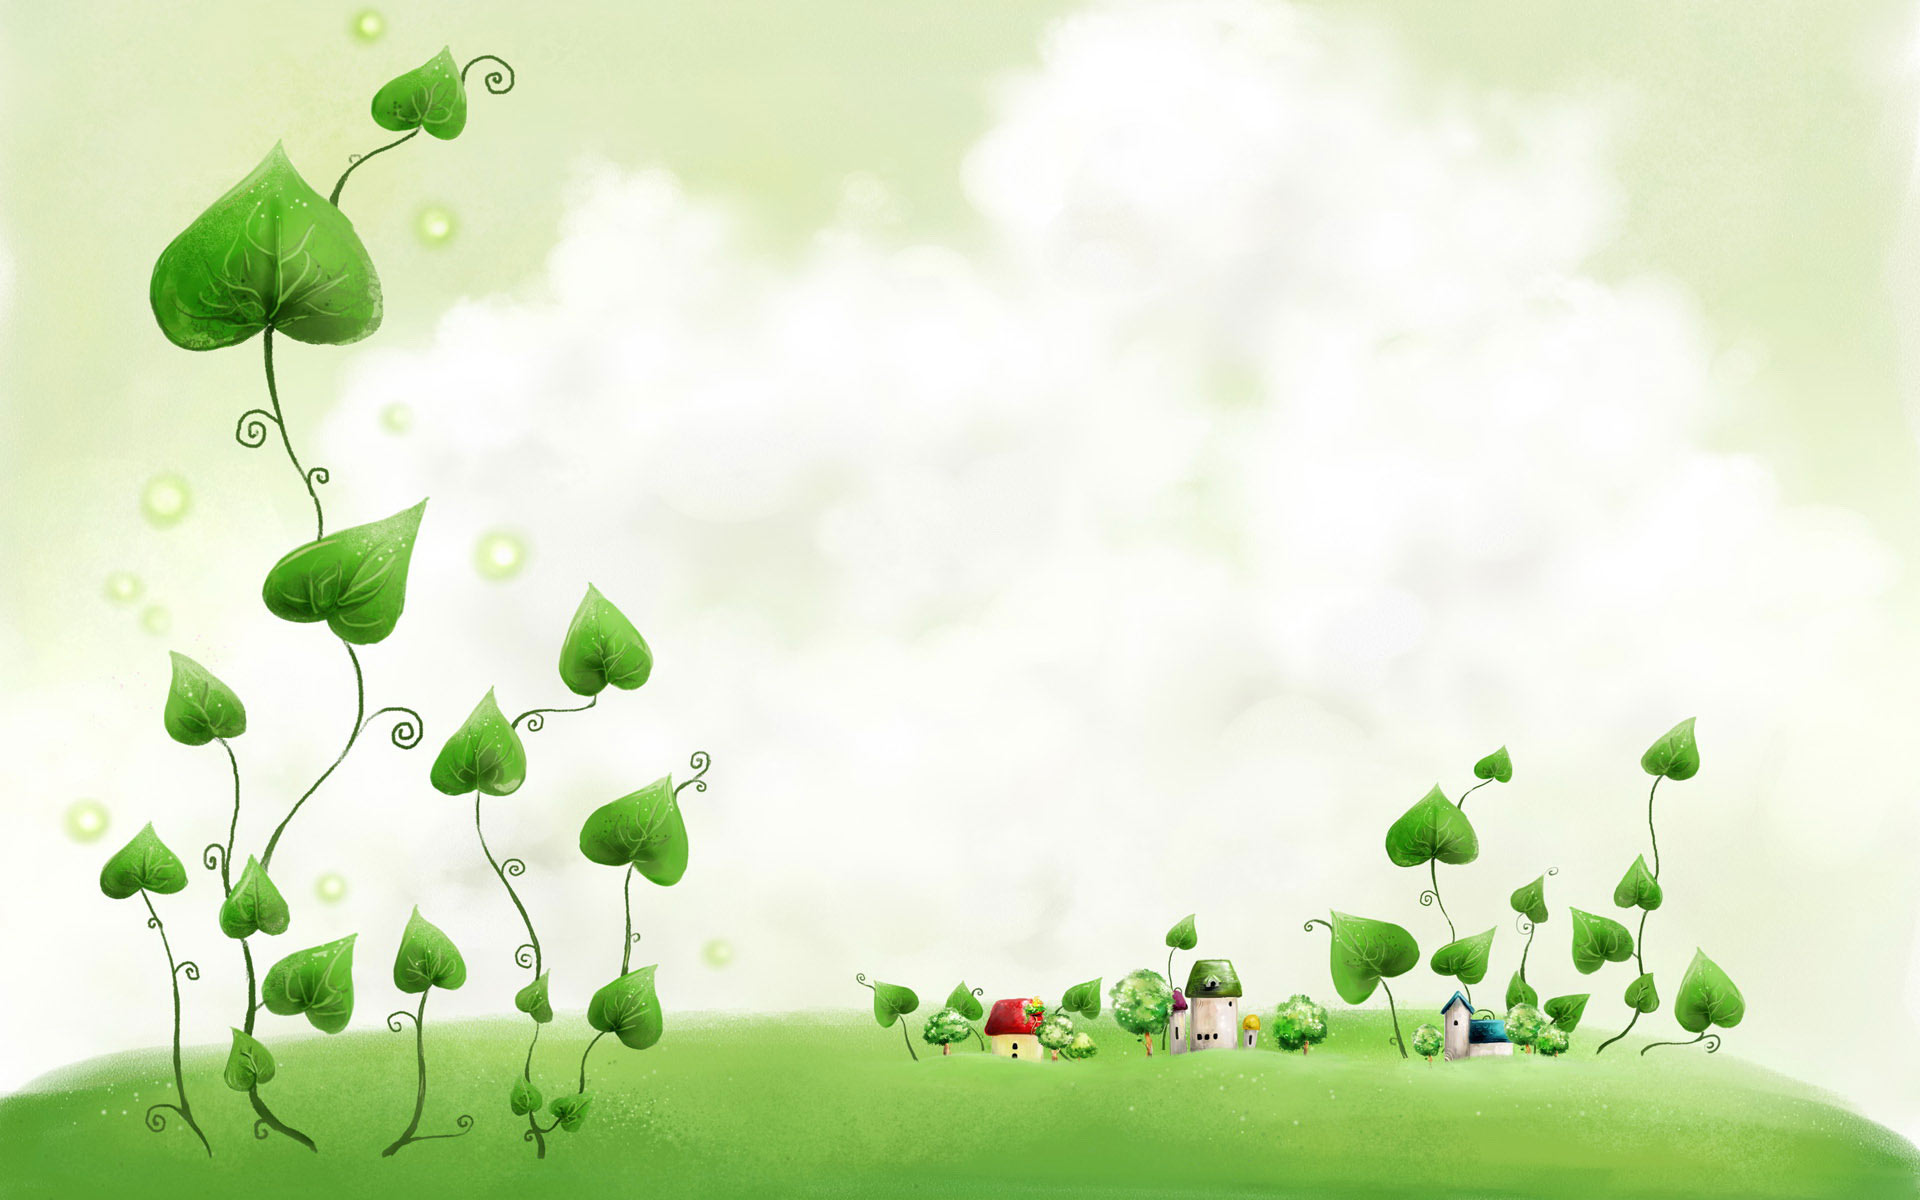 Cartoons Backgrounds Free Download 